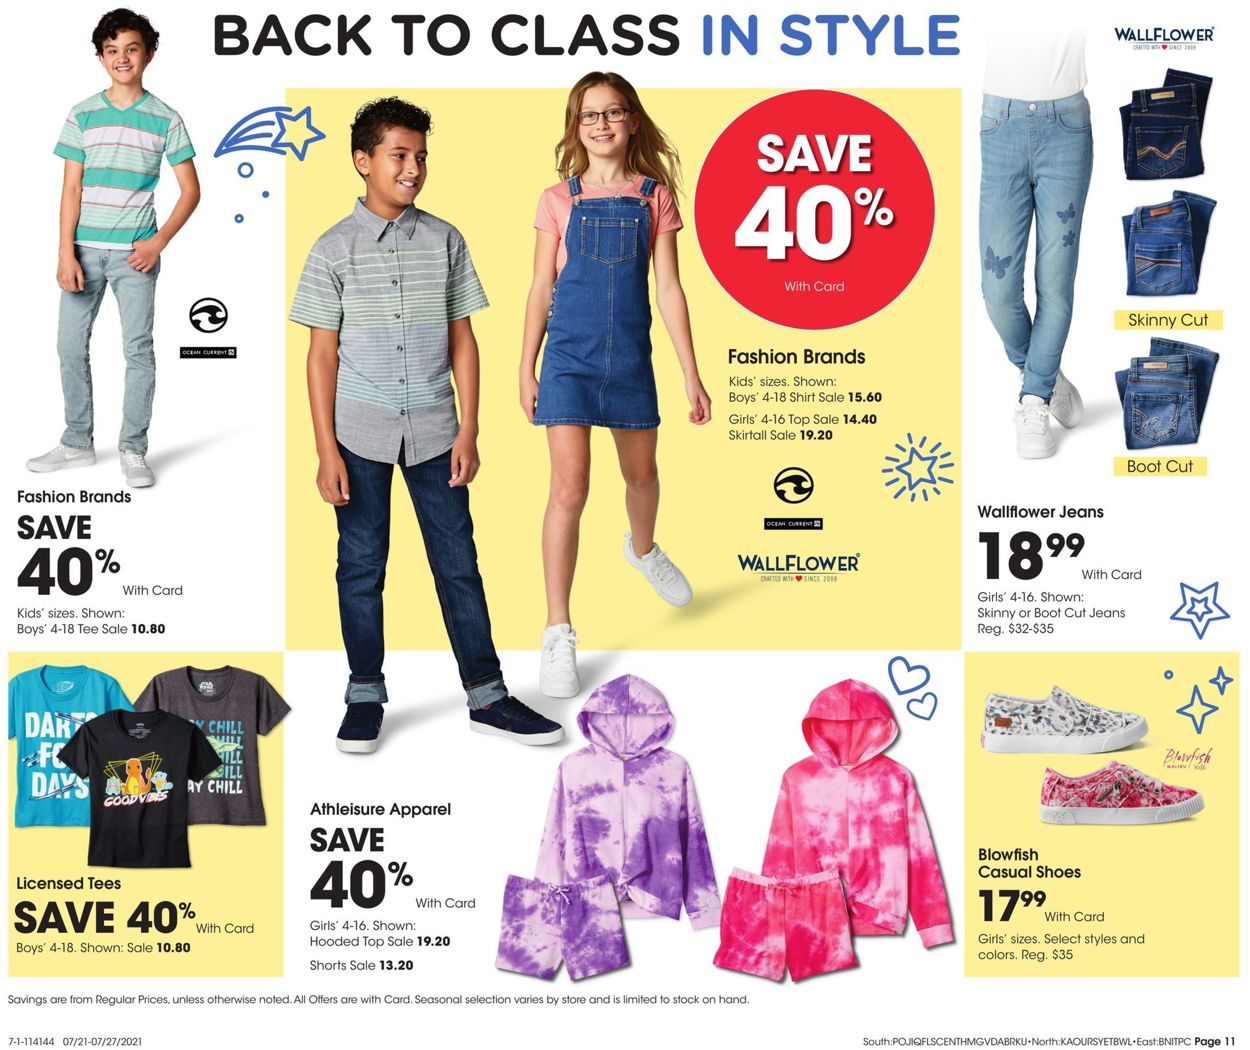 Fred Meyer Current weekly ad 07/21 - 07/27/2021 [11] - frequent-ads.com